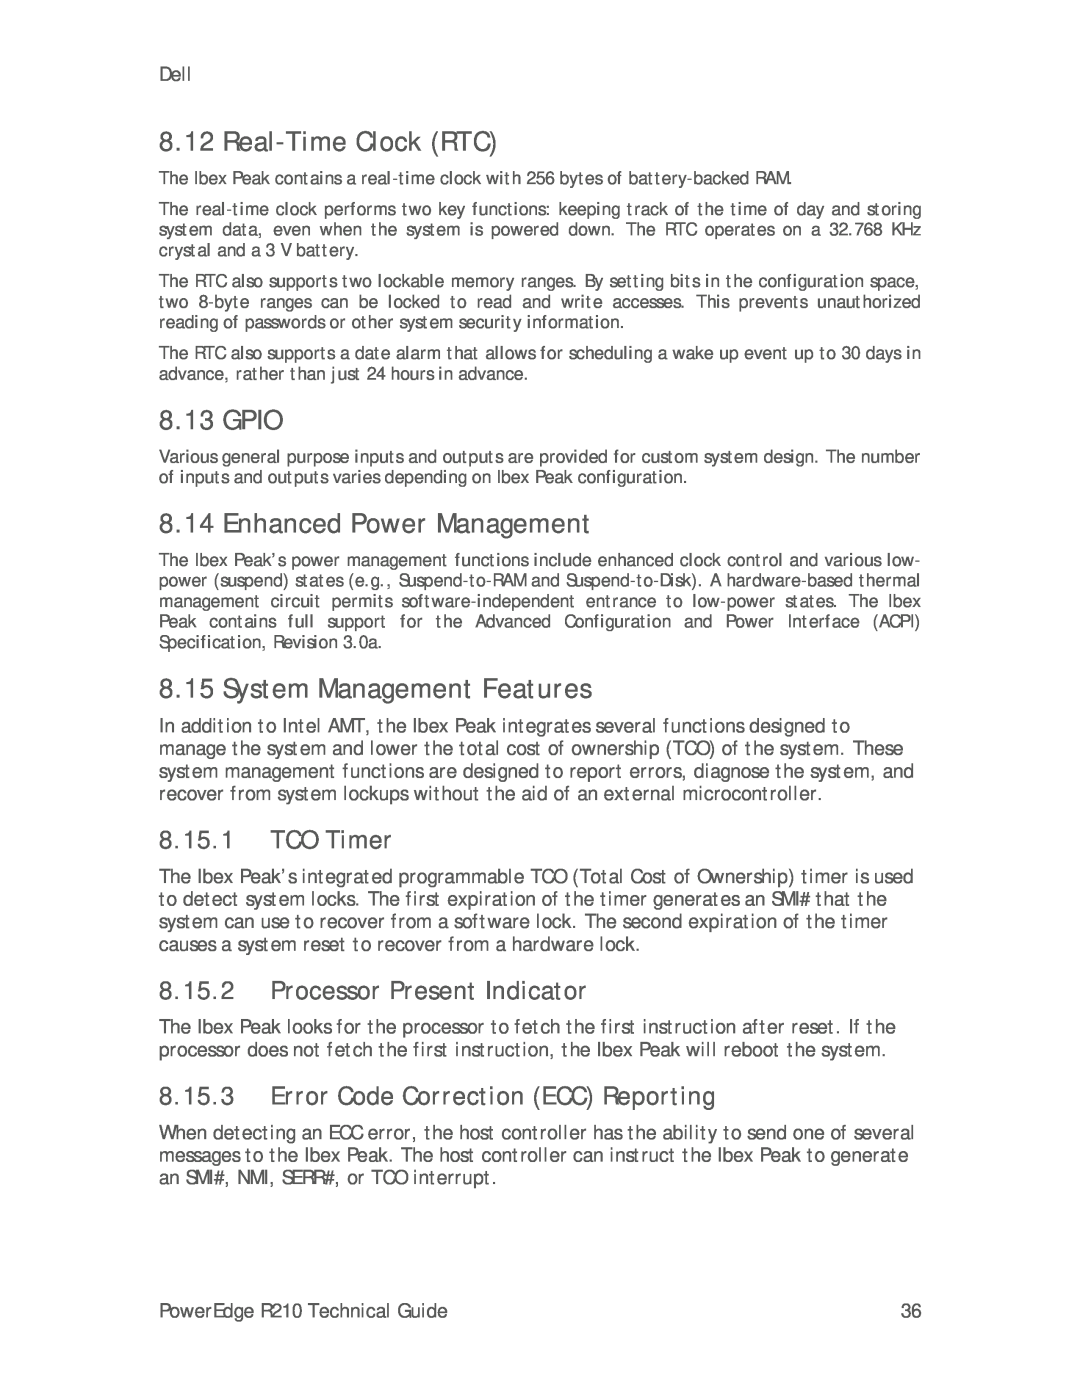 Dell R210 manual Real-Time Clock RTC, Gpio, Enhanced Power Management, System Management Features, TCO Timer 